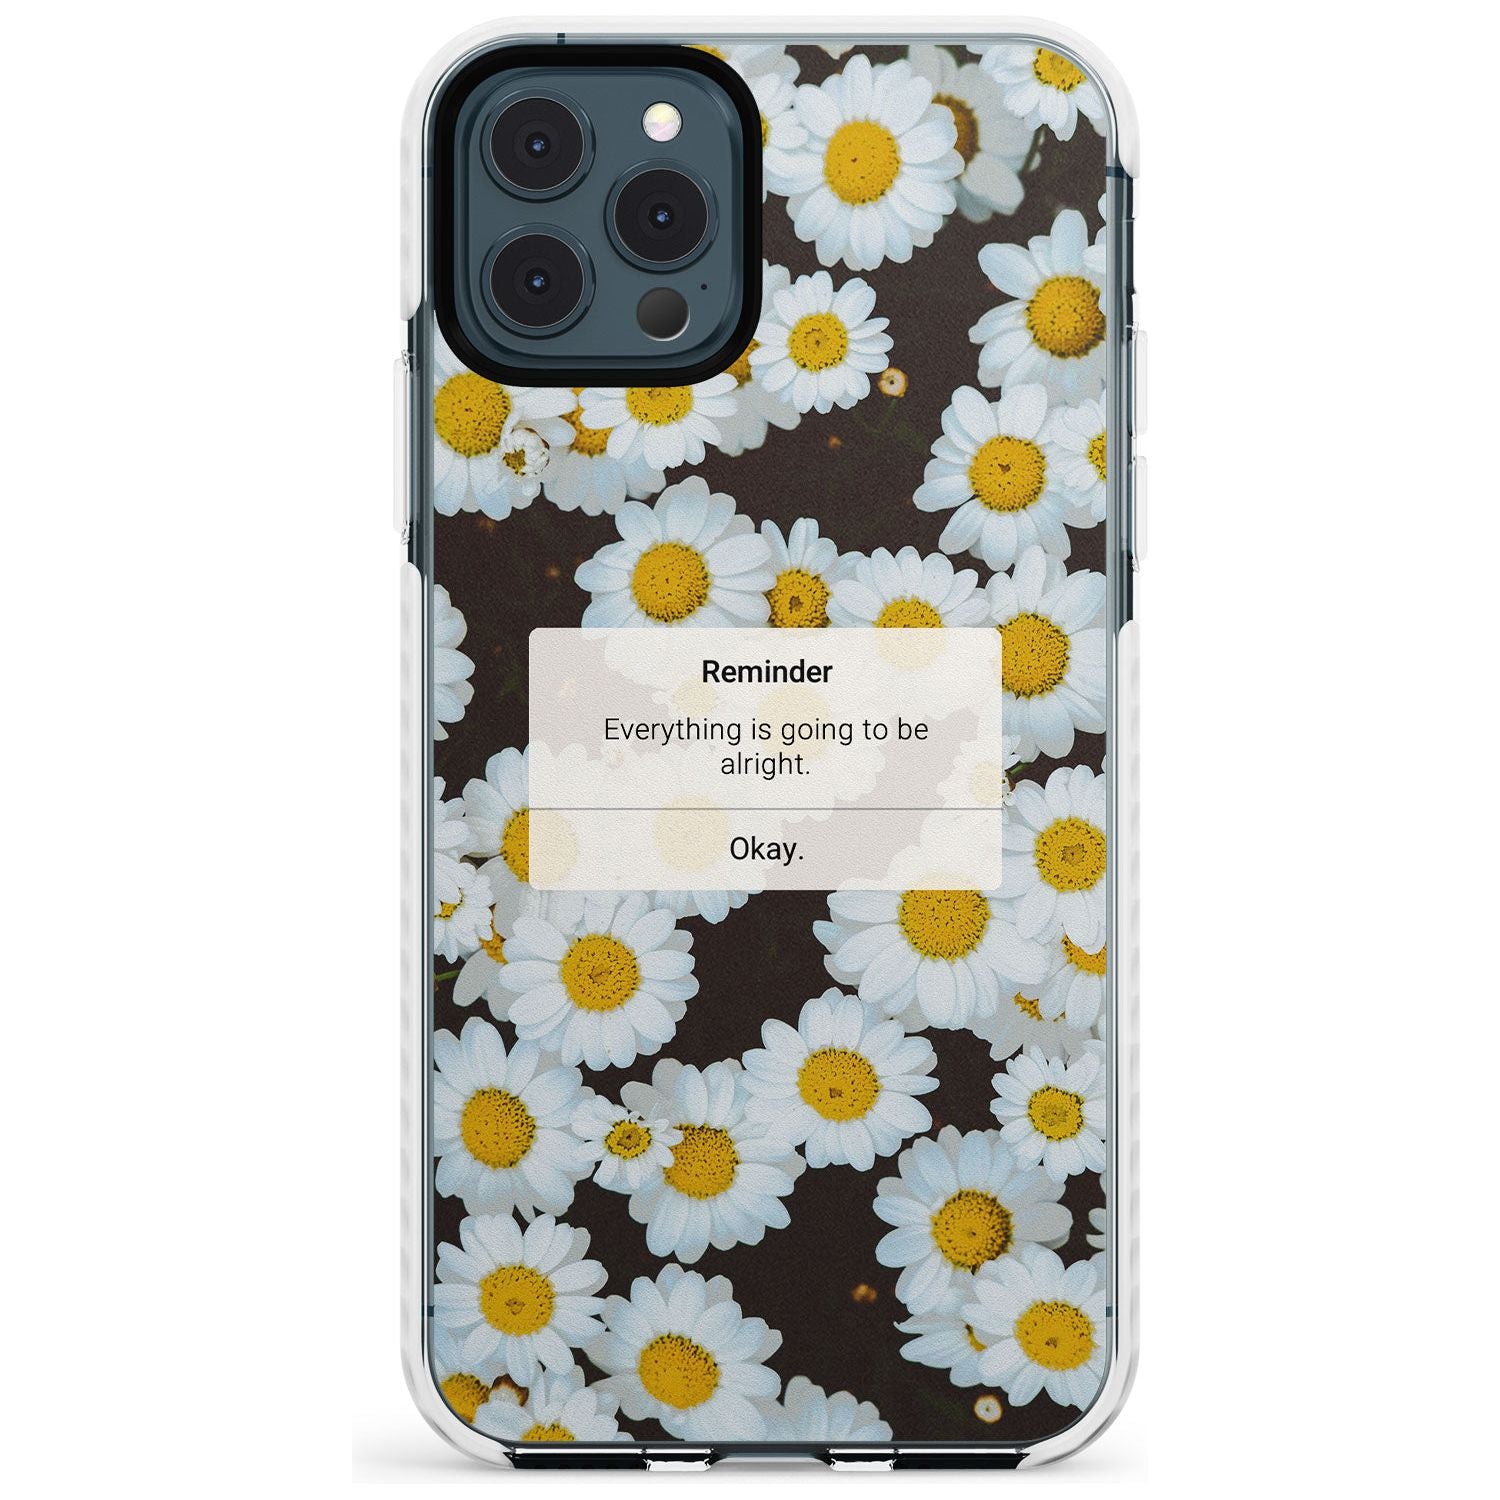 "Everything will be alright" iPhone Reminder Slim TPU Phone Case for iPhone 11 Pro Max